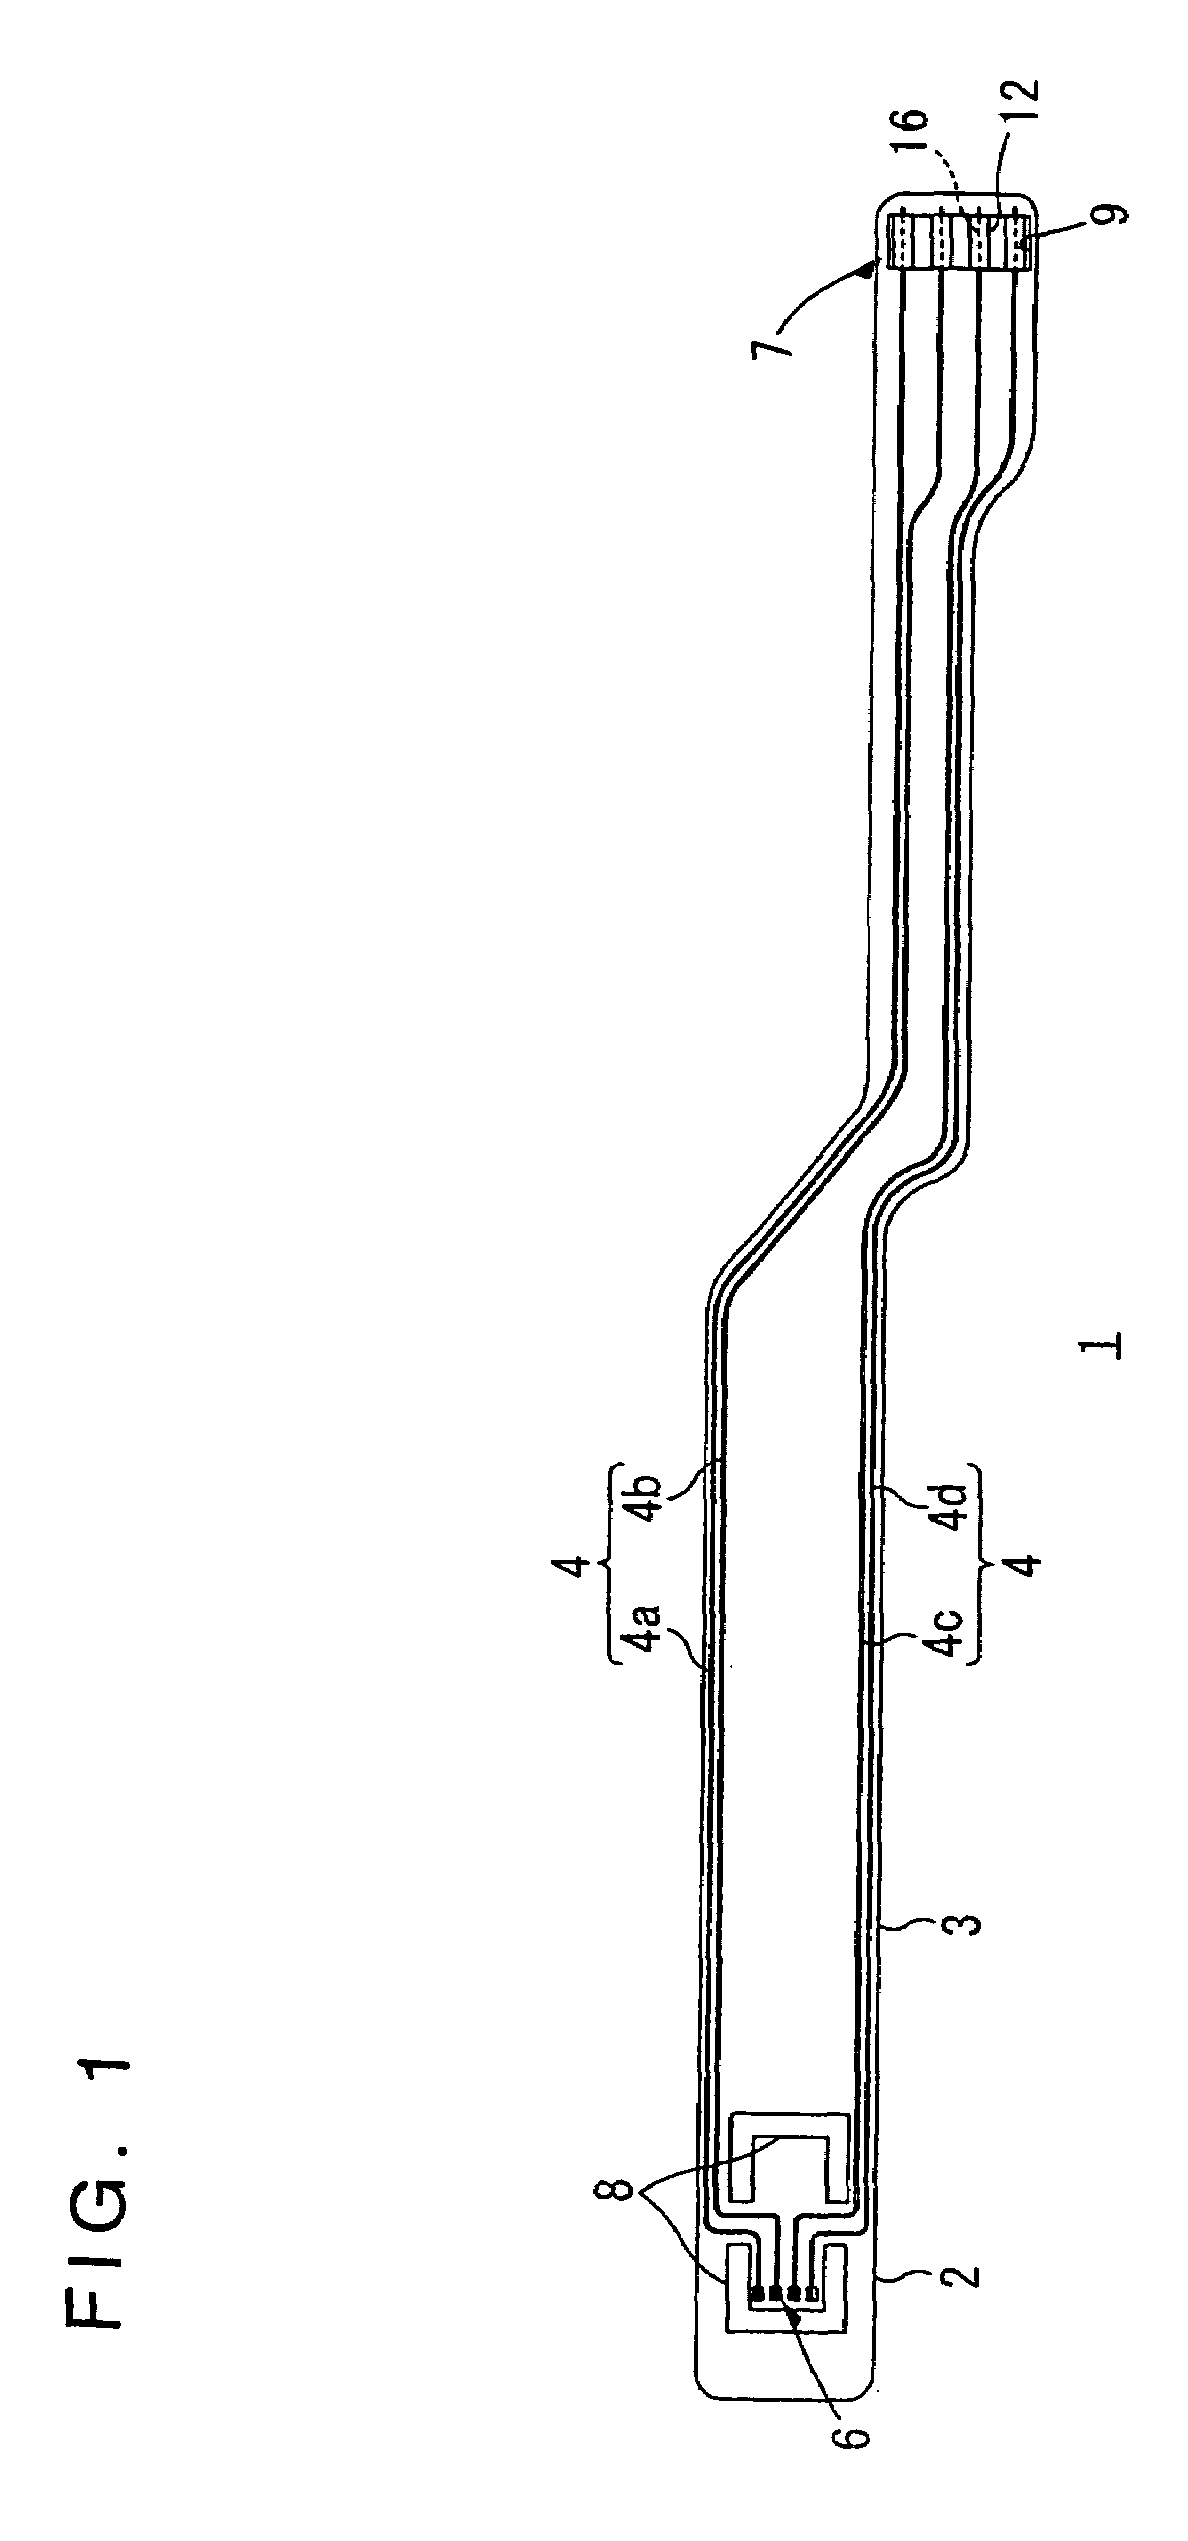 Suspension board having a circuit and a flying lead portion